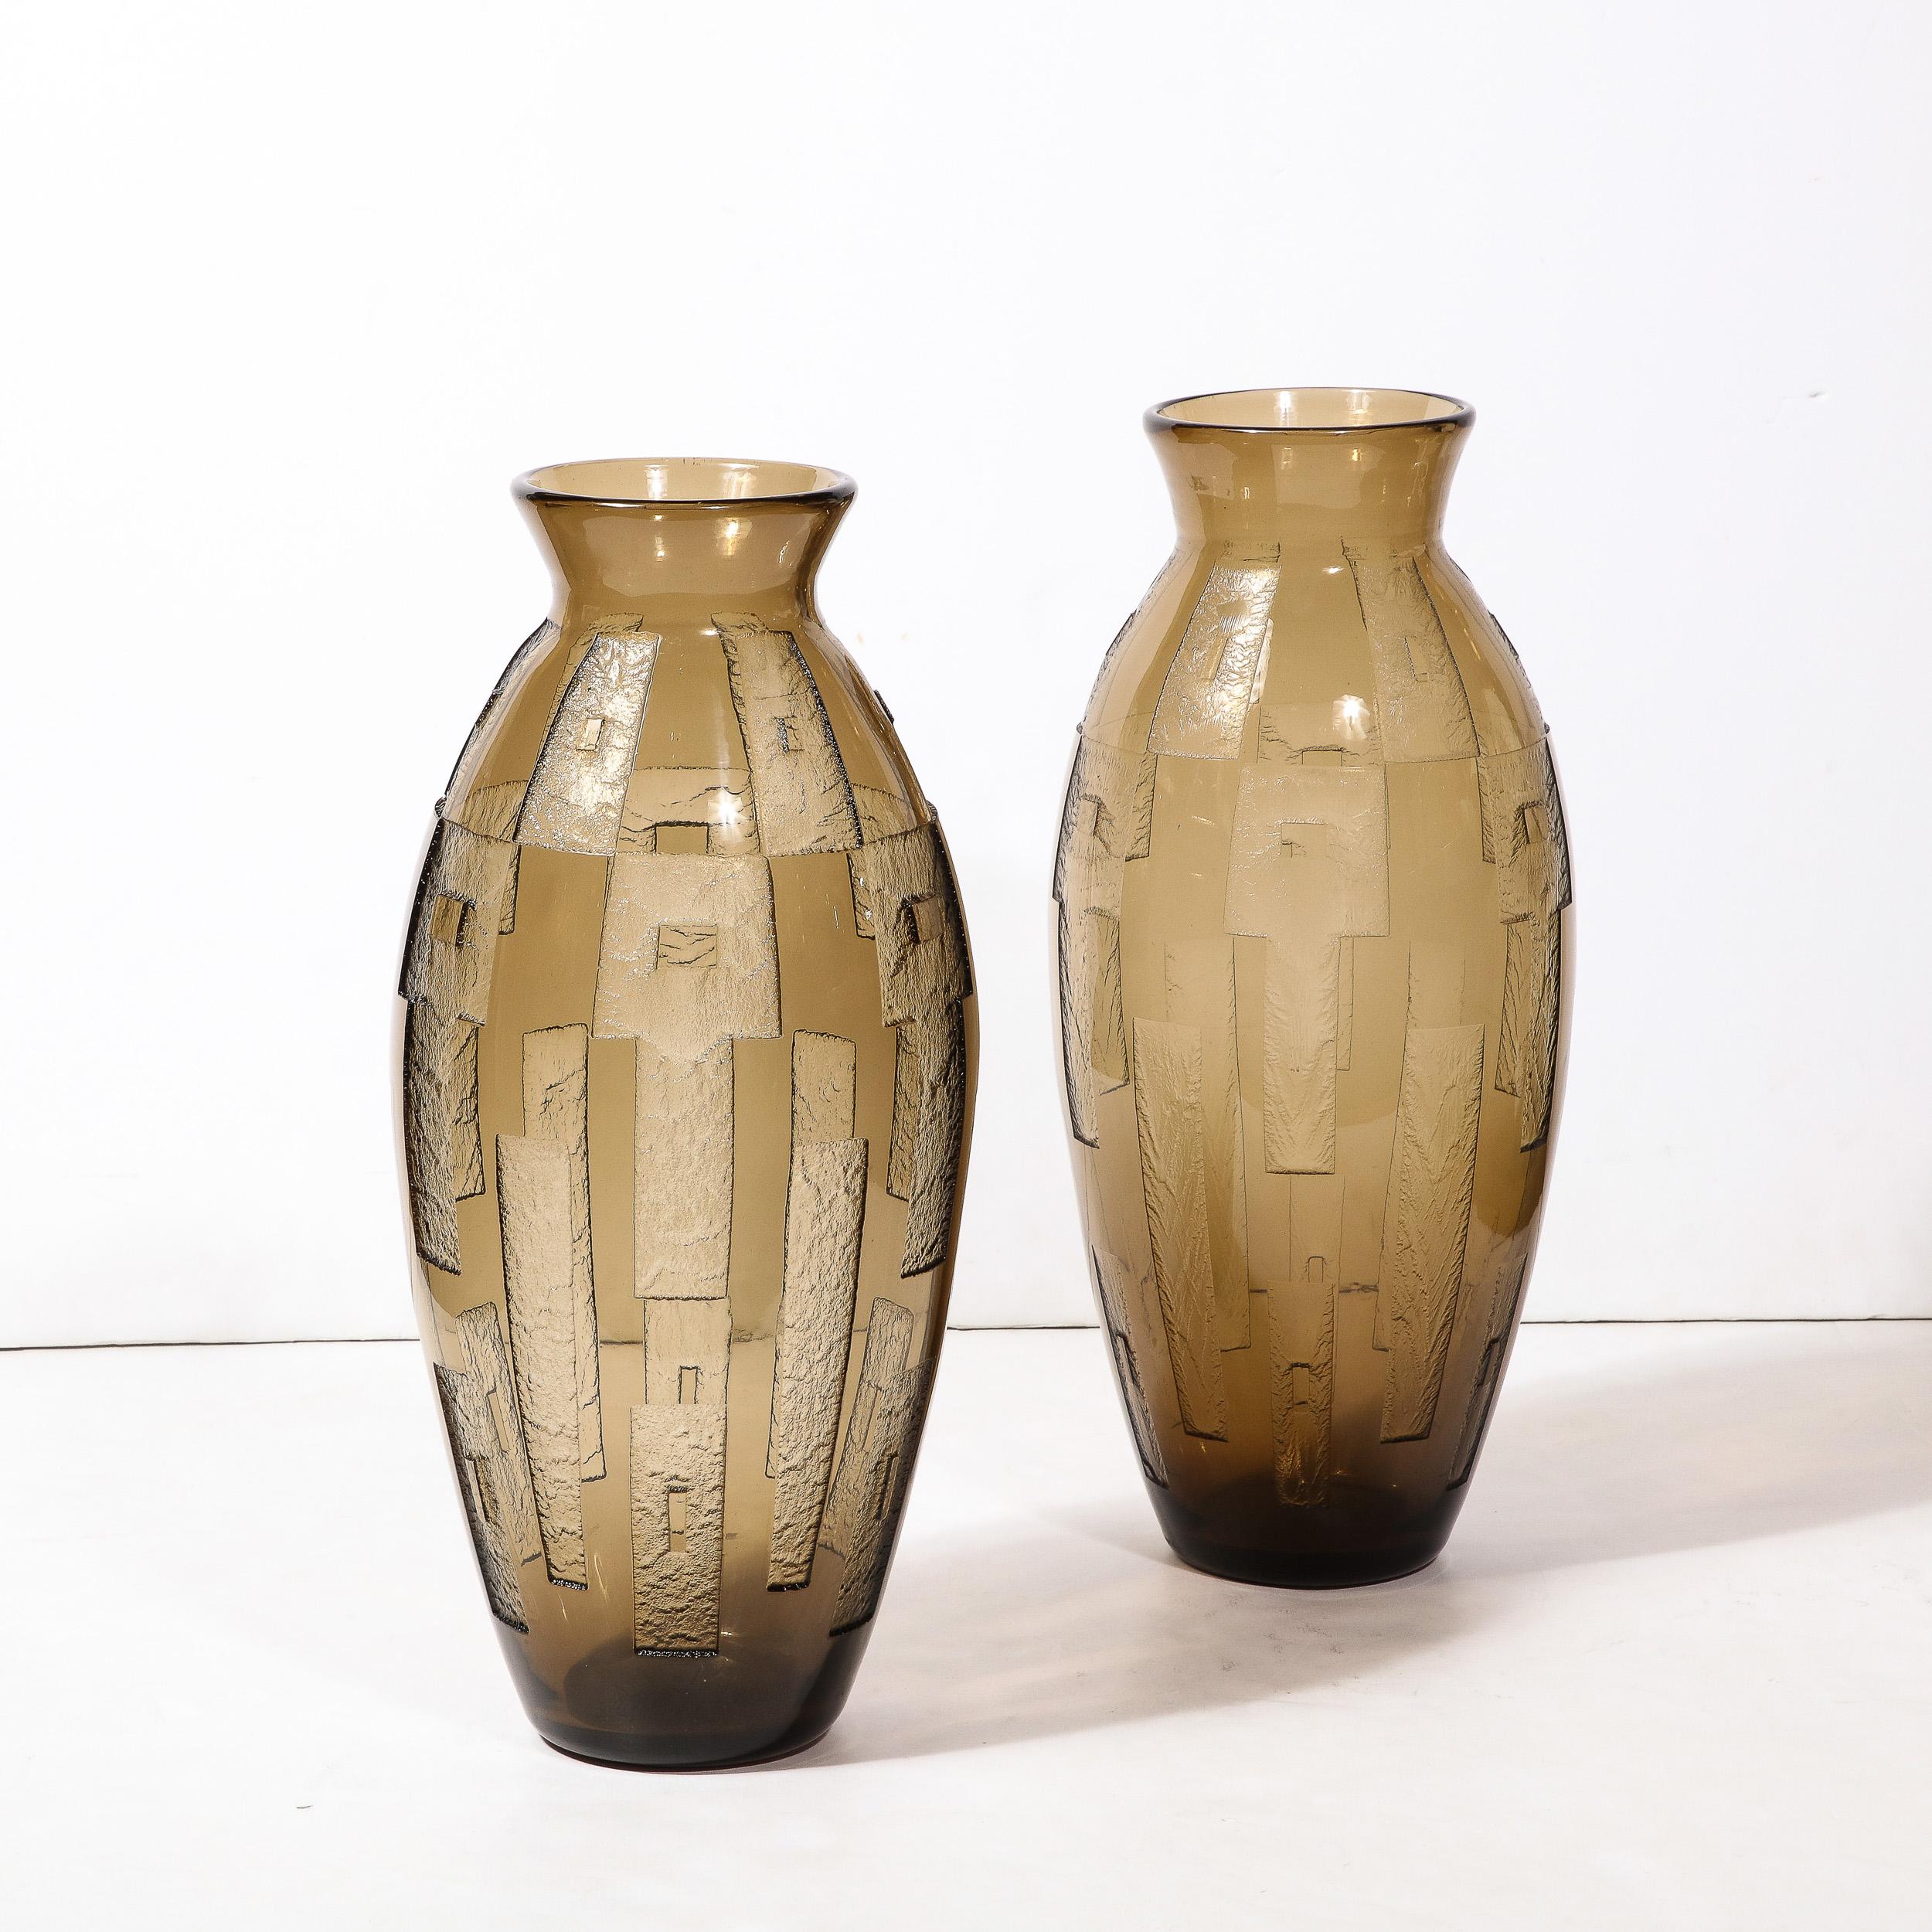 -This very rare pair of Art Deco Cubist style Acid Etched Vases originate from the esteemed Art Glass Company Daum in Nancy, France, Circa 1930. Unbelievable in scale, profile, unmatched technical execution, and rarity.  Executed in acid etched